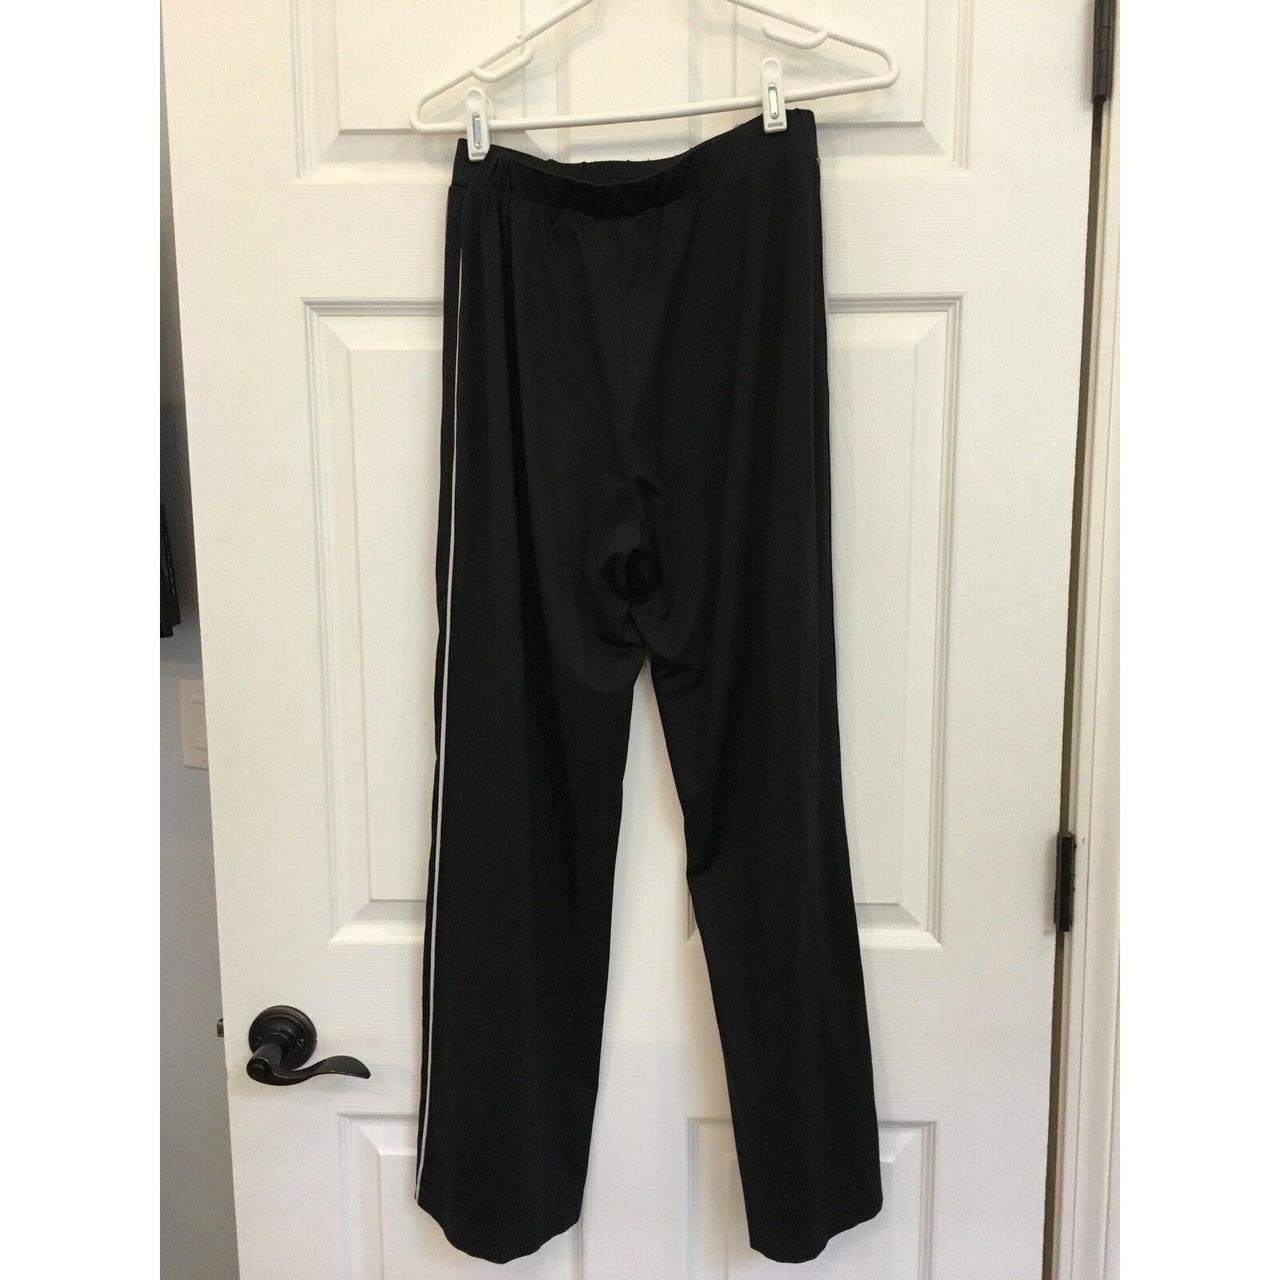 Product Image 2 - CHICO'S Spa Athletic Stretch Pants